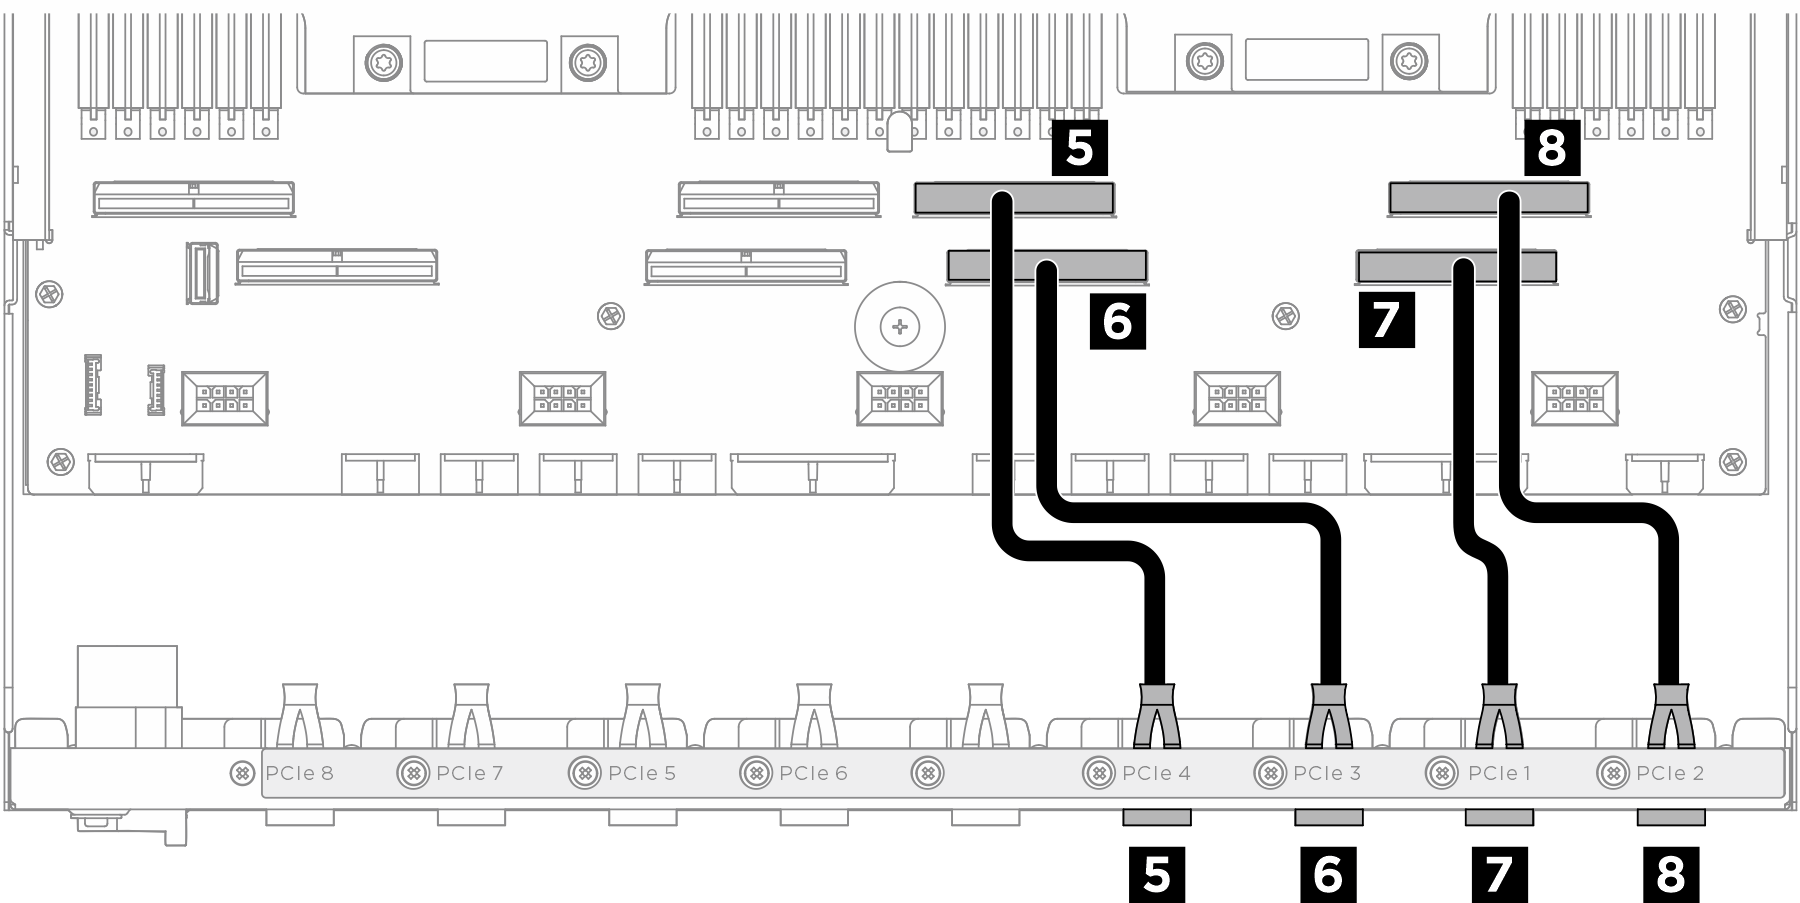 PCIe-Switch-Platine cable routing (signal cables)